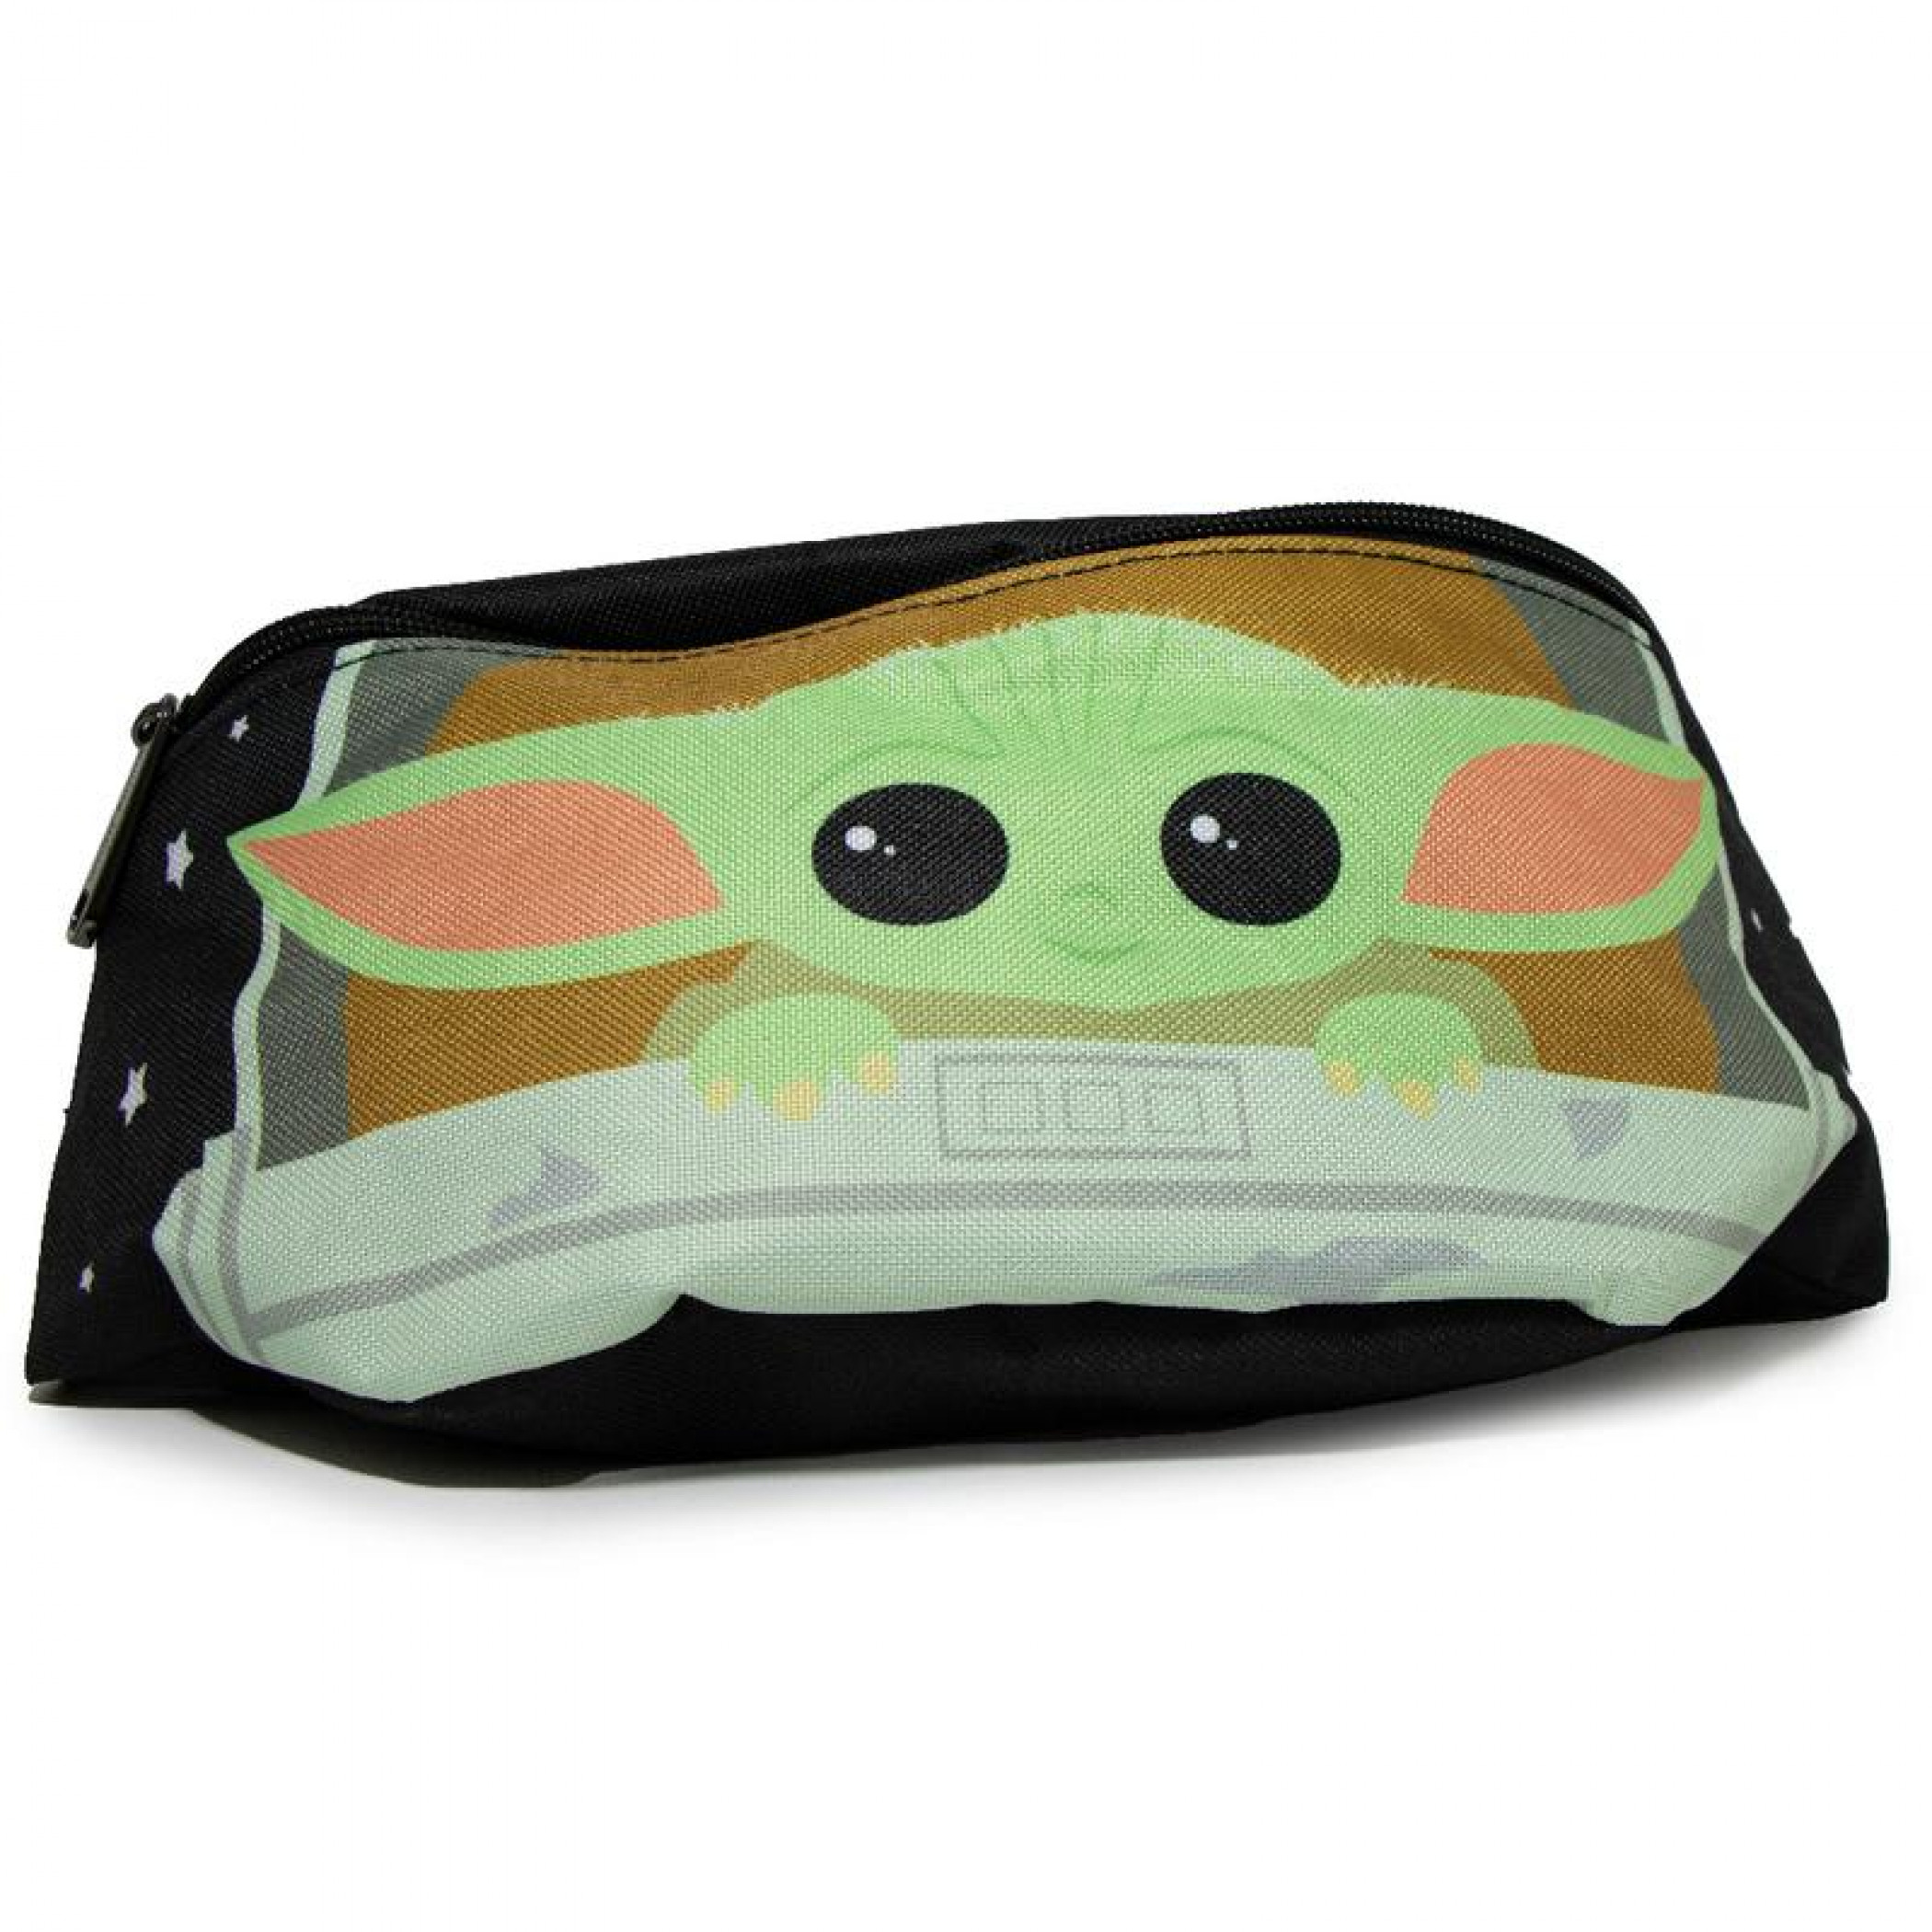 Star Wars The Mandalorian The Child Chibi Carriage Fanny Pack